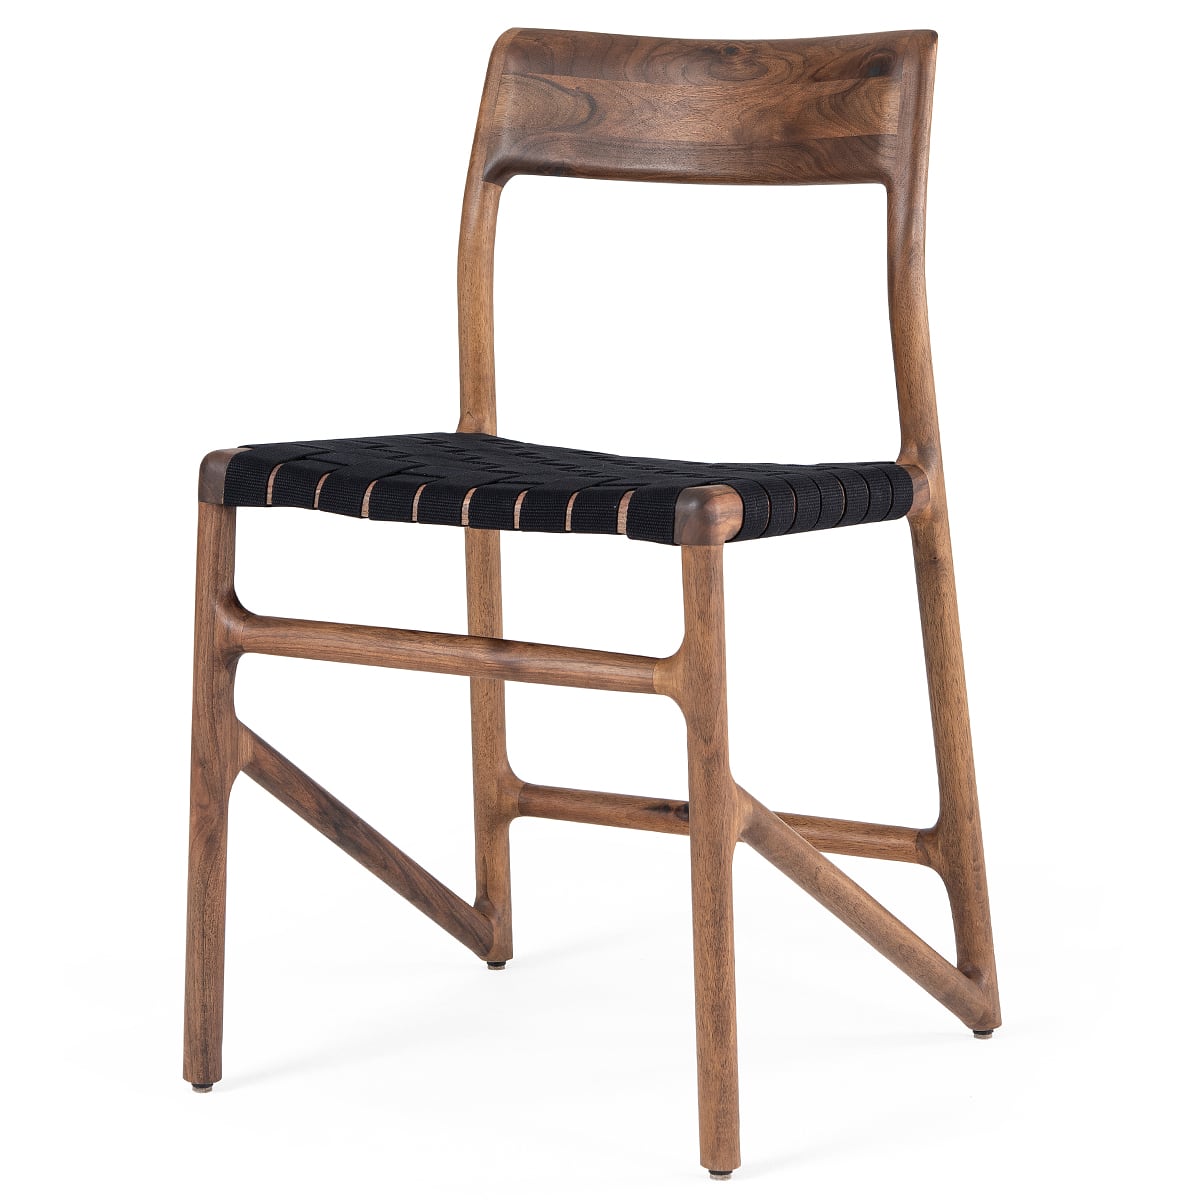 FAWN - chair - Solid walnut, natural oiled finish, cotton webbing black